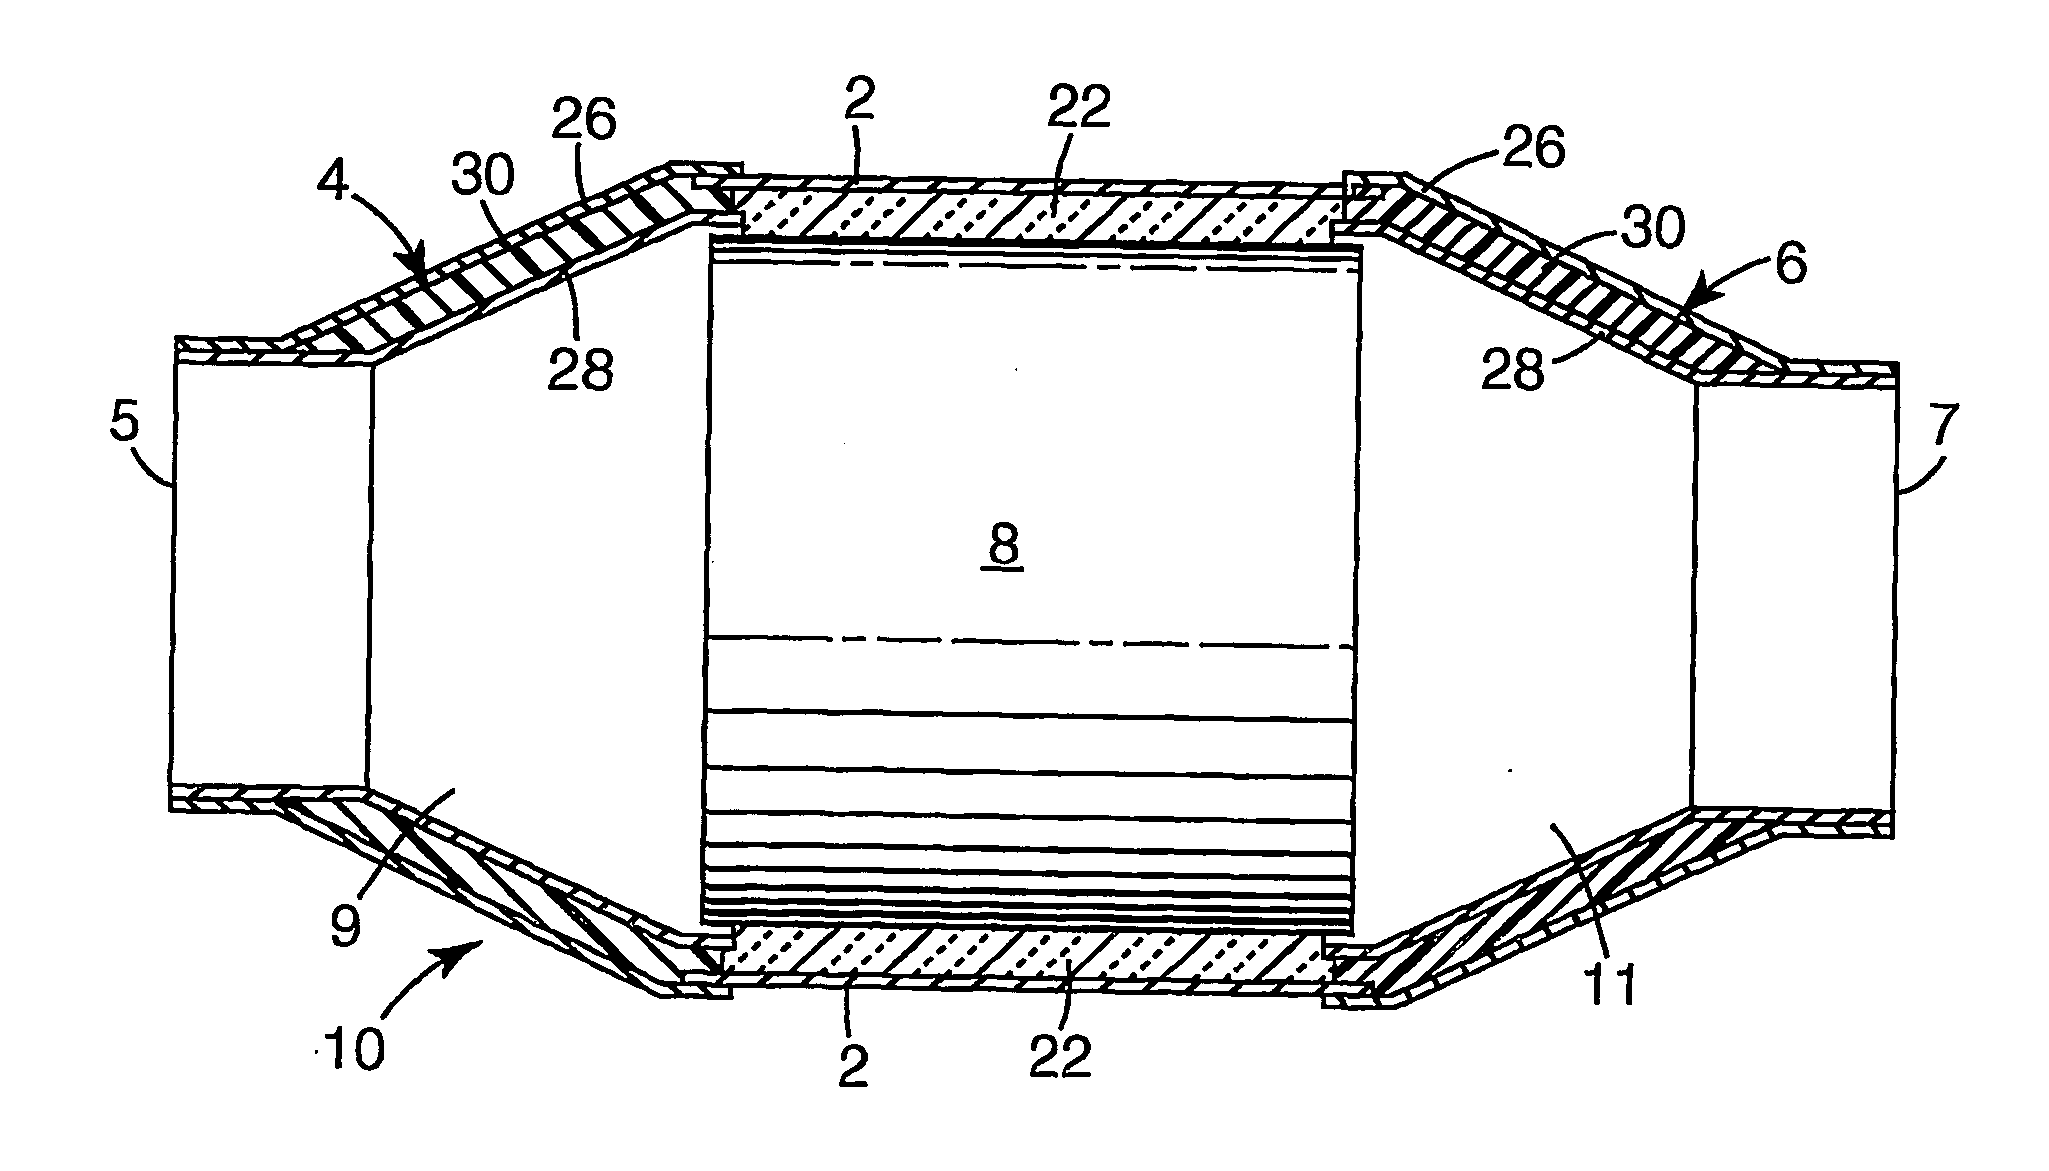 Non-classified end cone insulation for catalytic converter